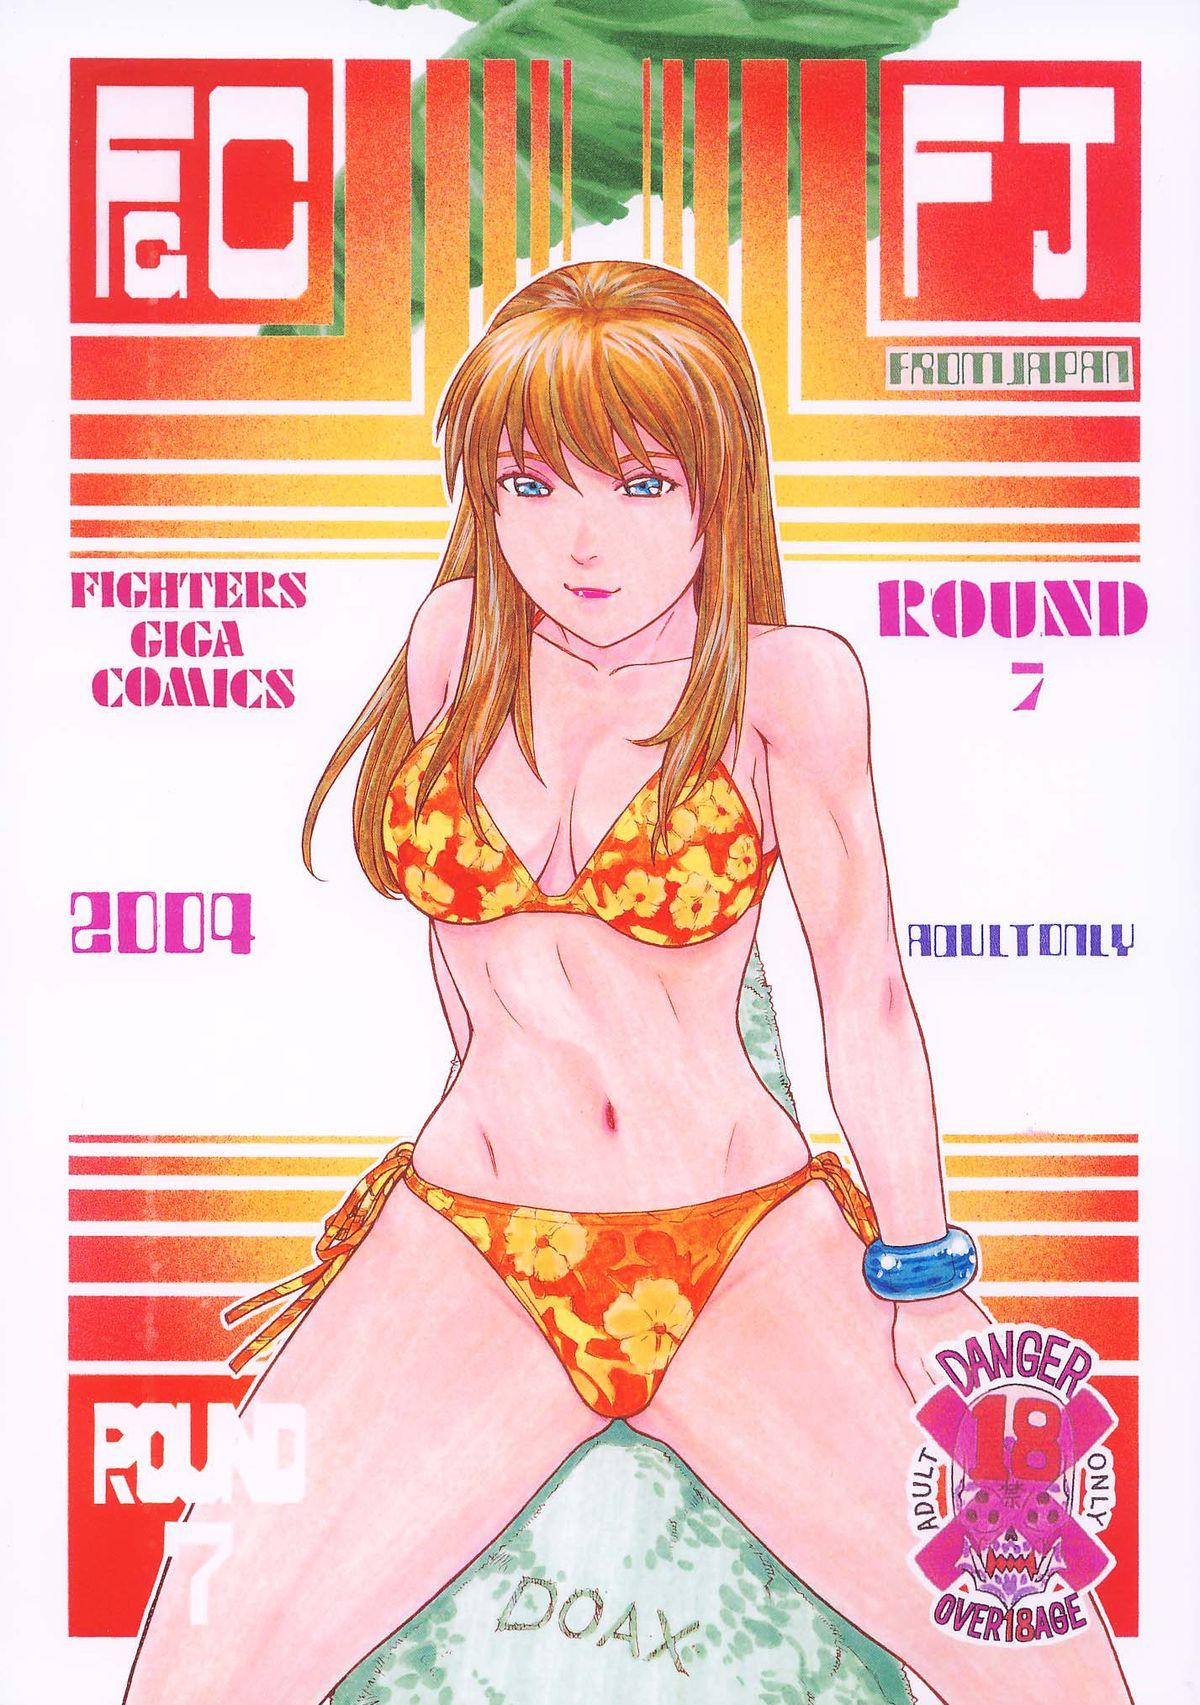 Pervert Fighters Giga Comics Round 7 - King of fighters Dead or alive Soulcalibur Petite - Picture 1